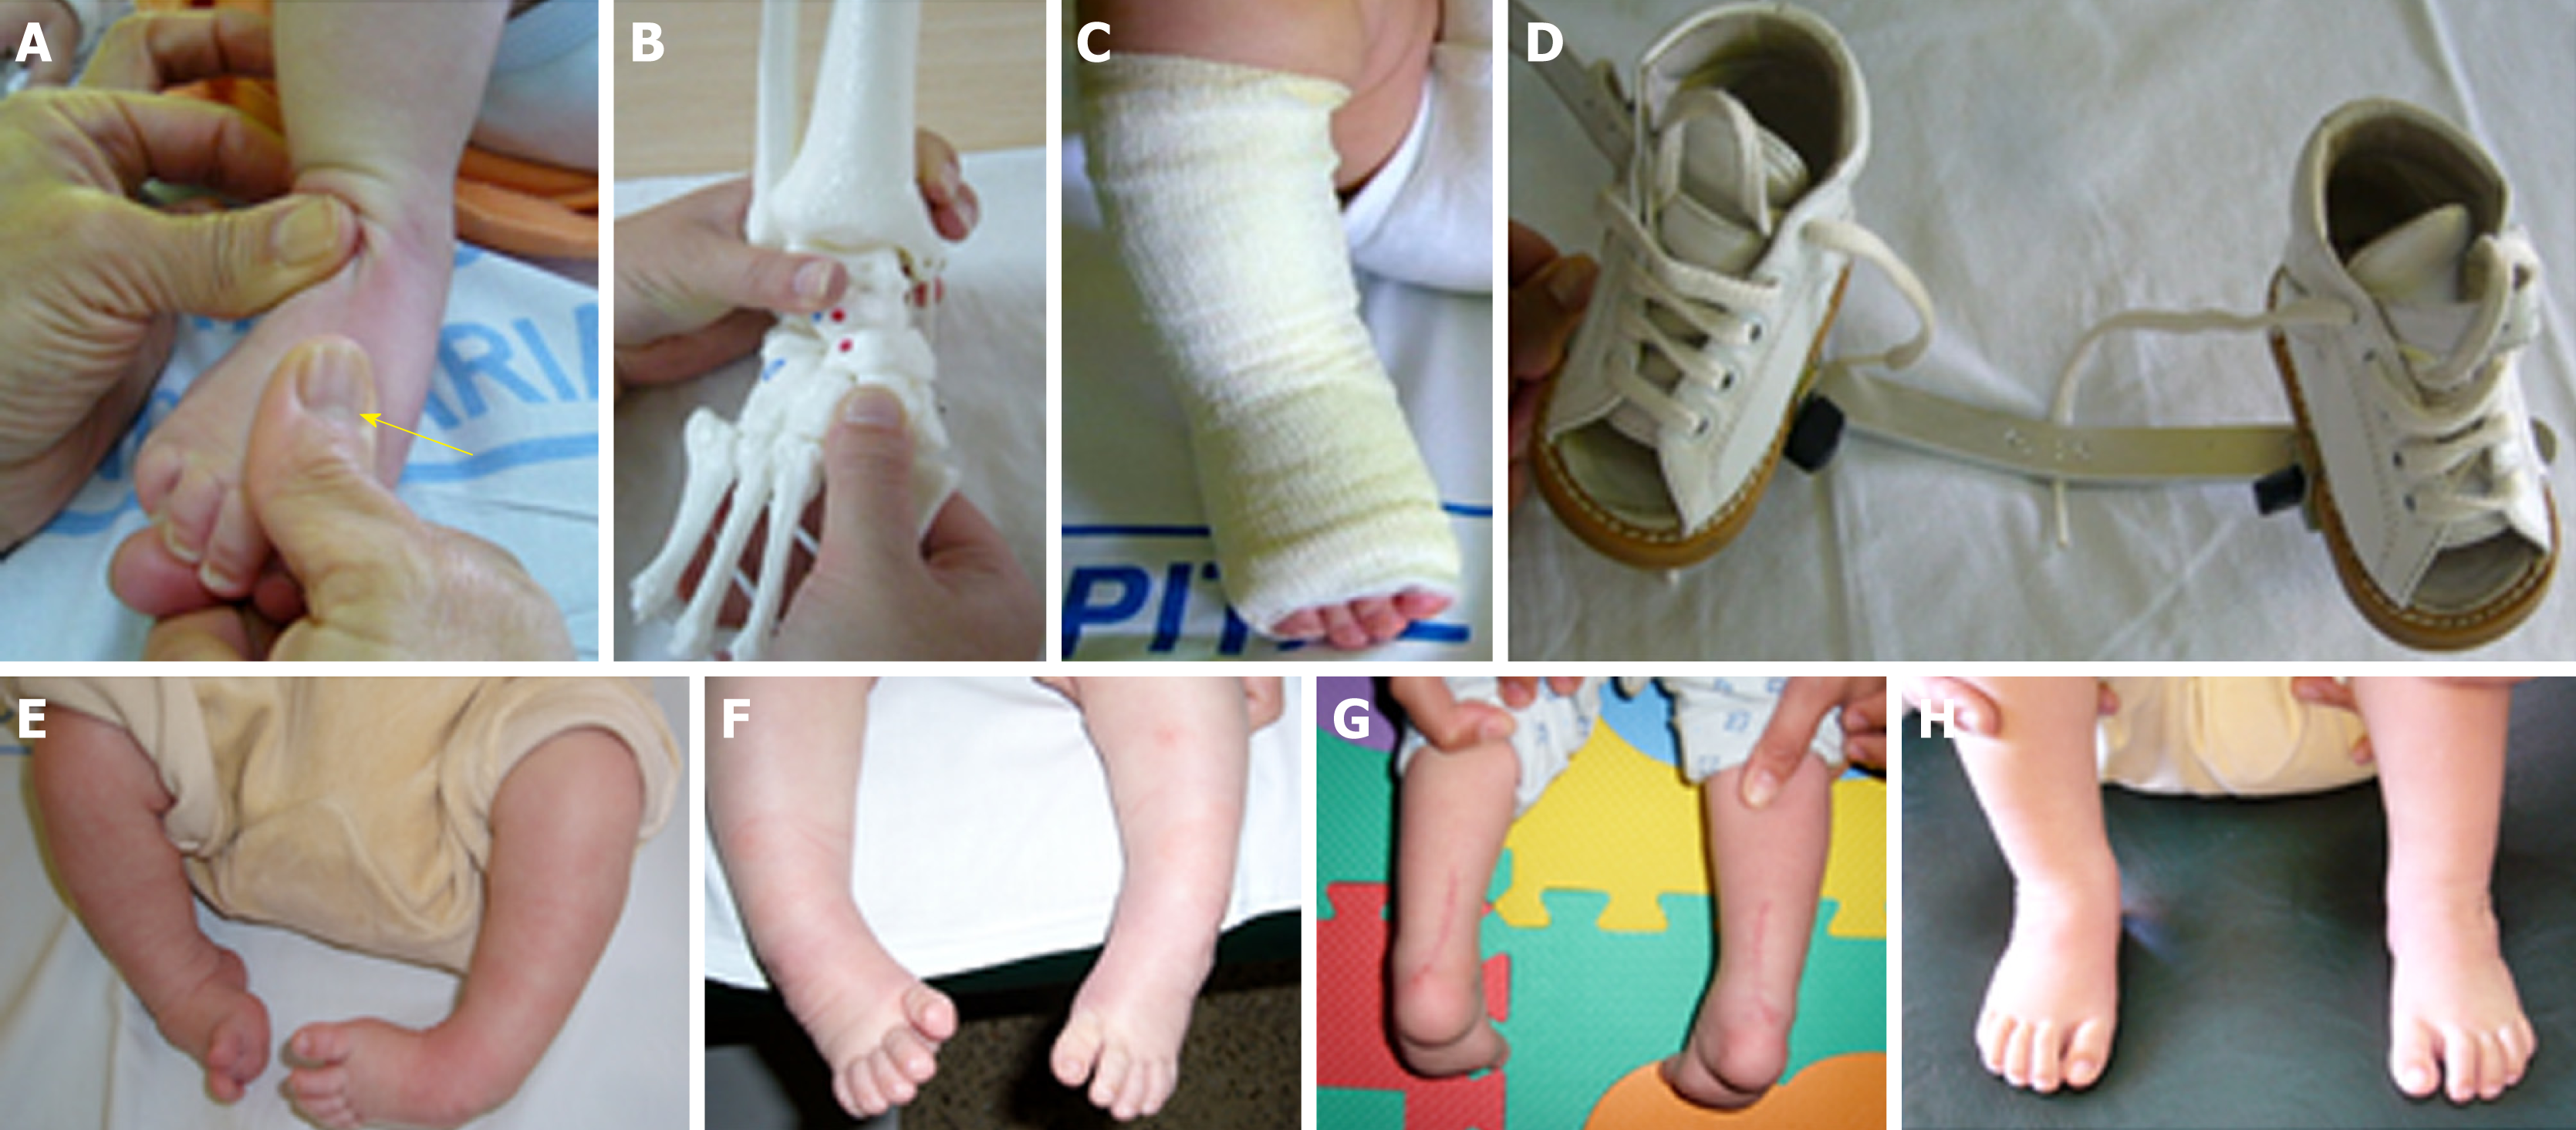 Functional Physiotherapy Method Results For The Treatment Of Idiopathic Clubfoot